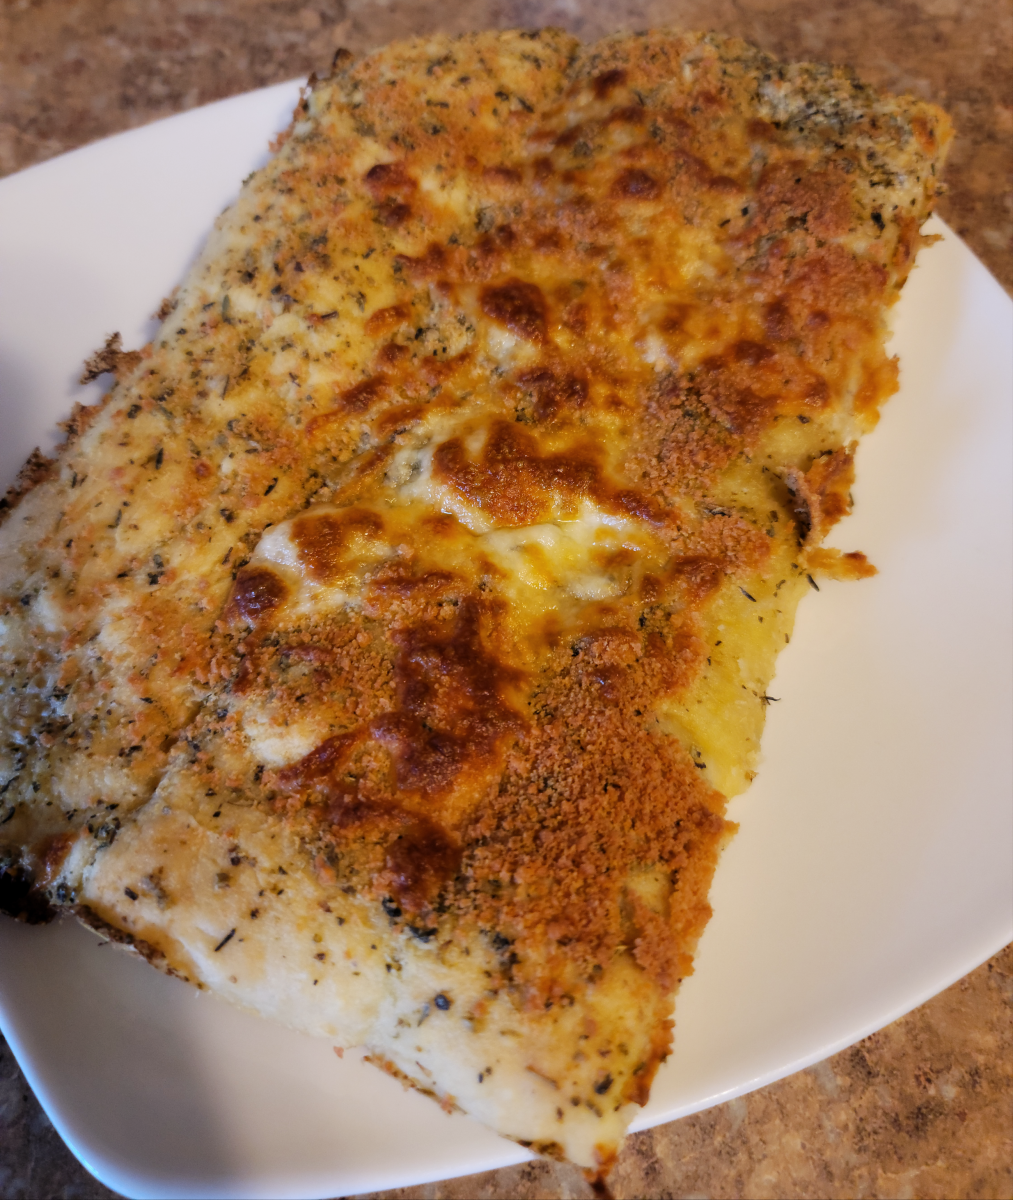 I love Pizza Hut breadsticks, but my teen prefers Marco's Pizza Cheesy Bread. My homemade breadsticks take inspiration from both!